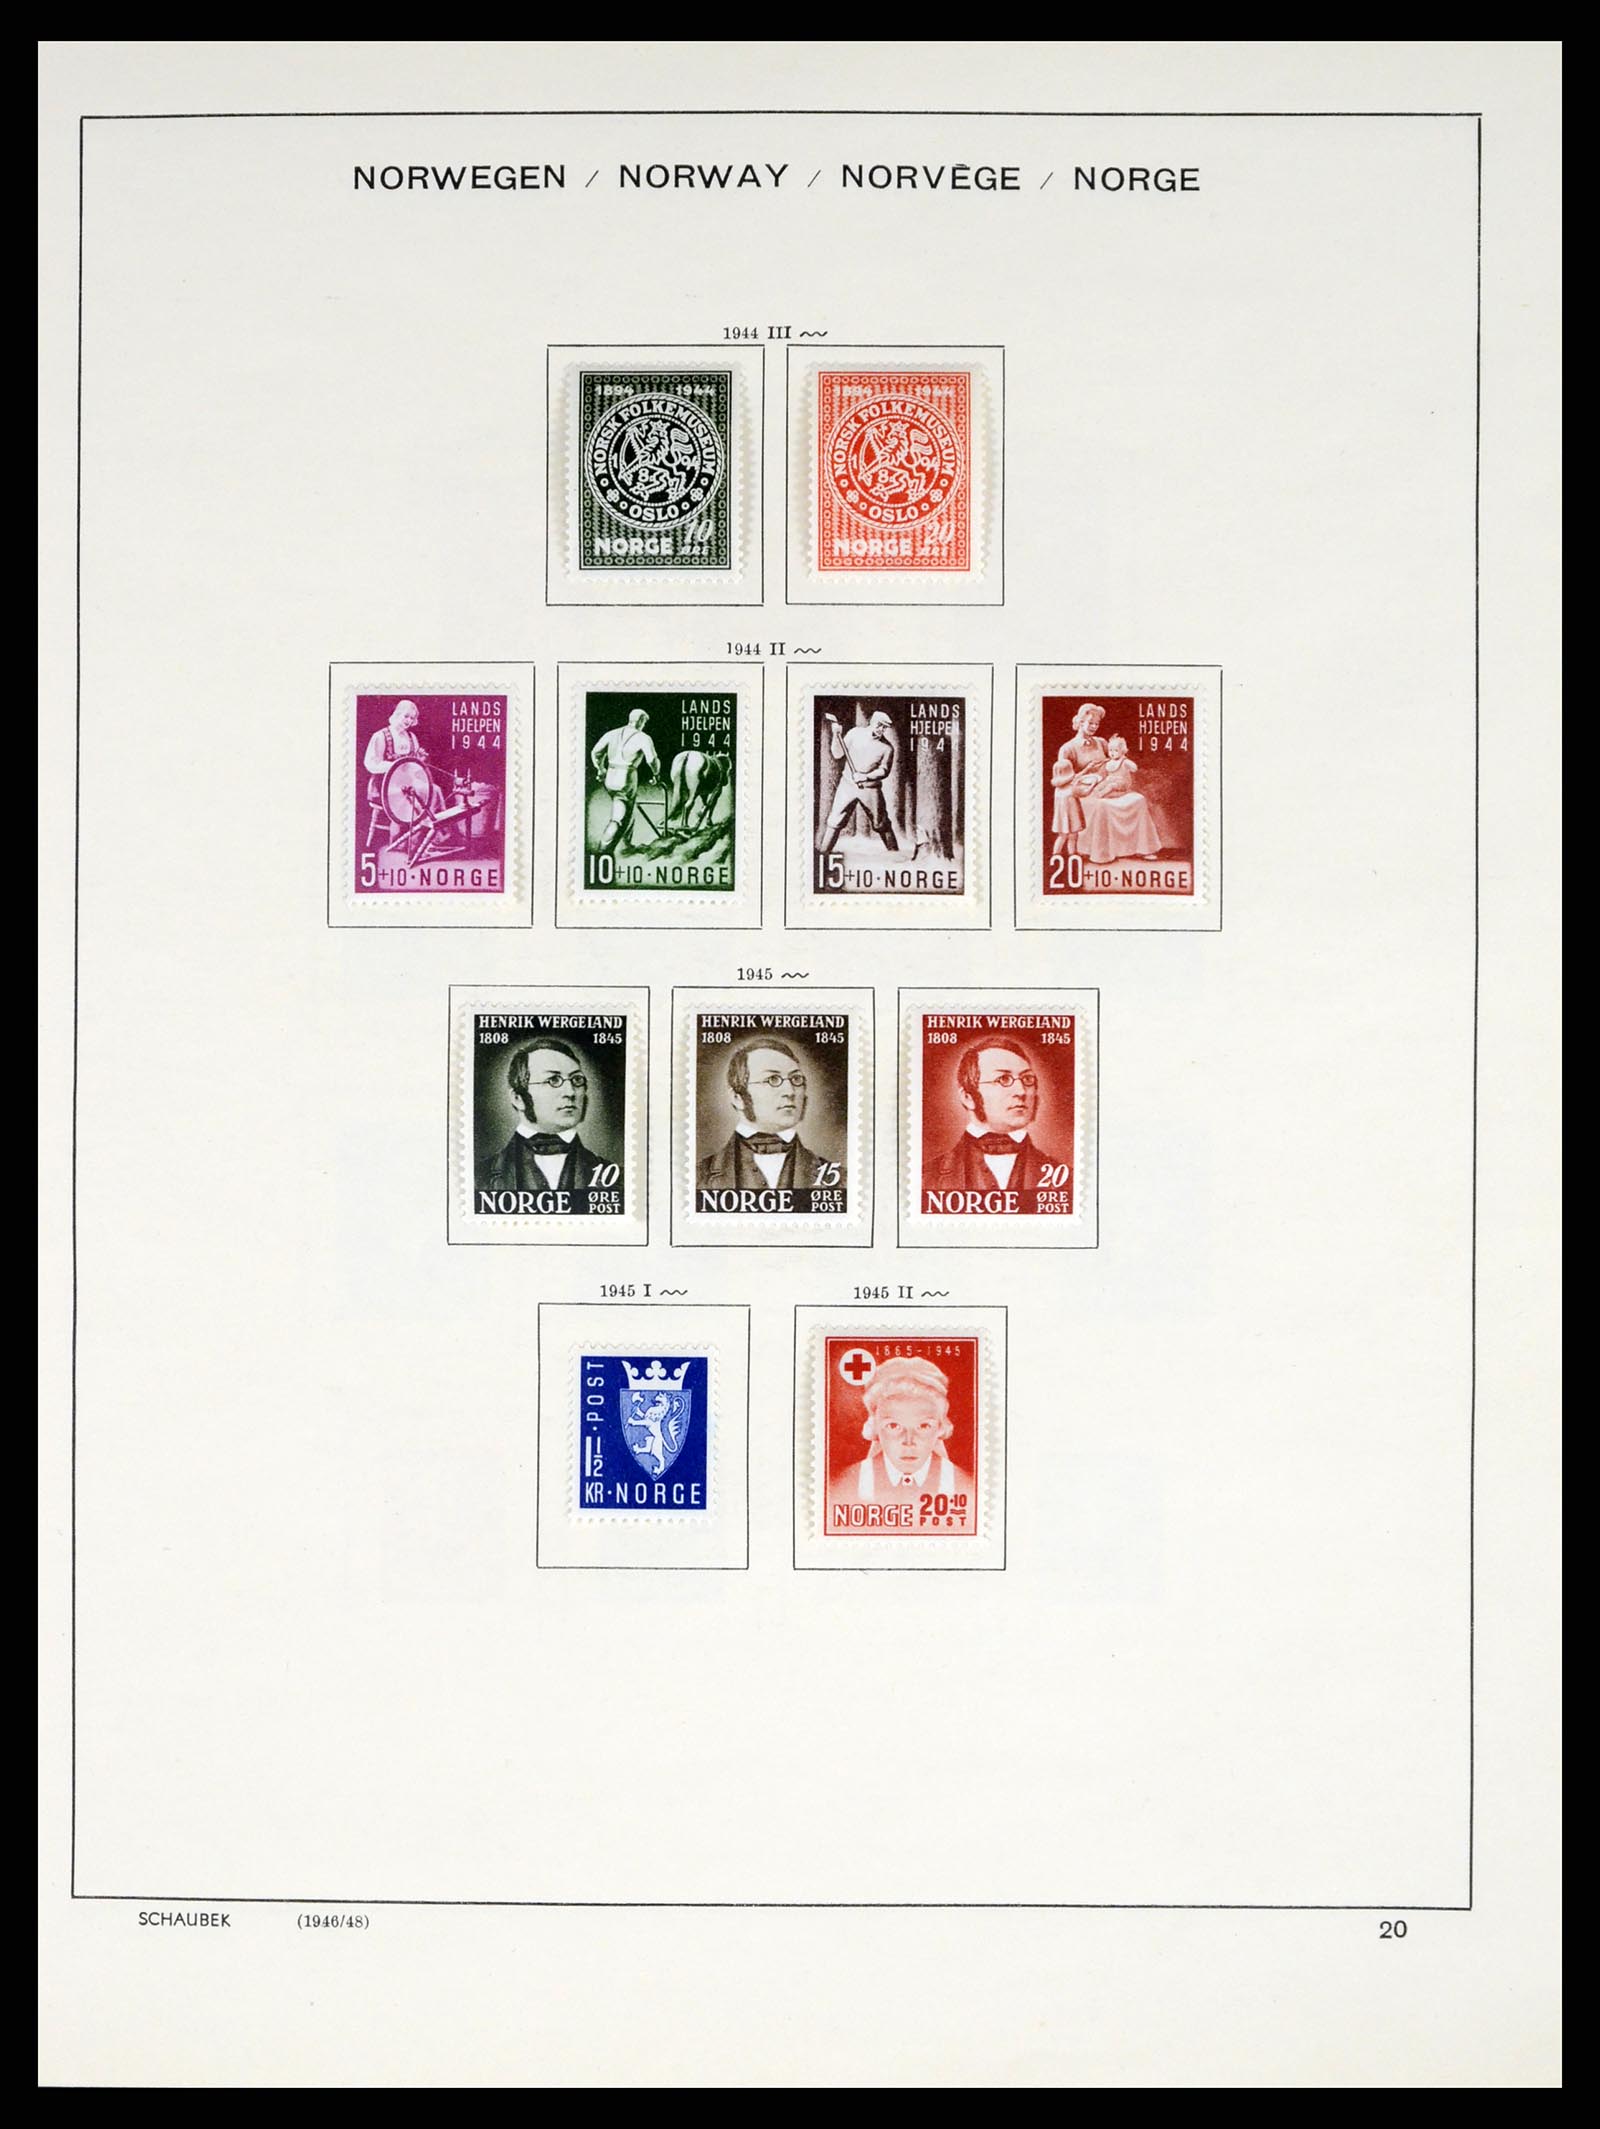 37544 018 - Stamp collection 37544 Norway 1855-2014.